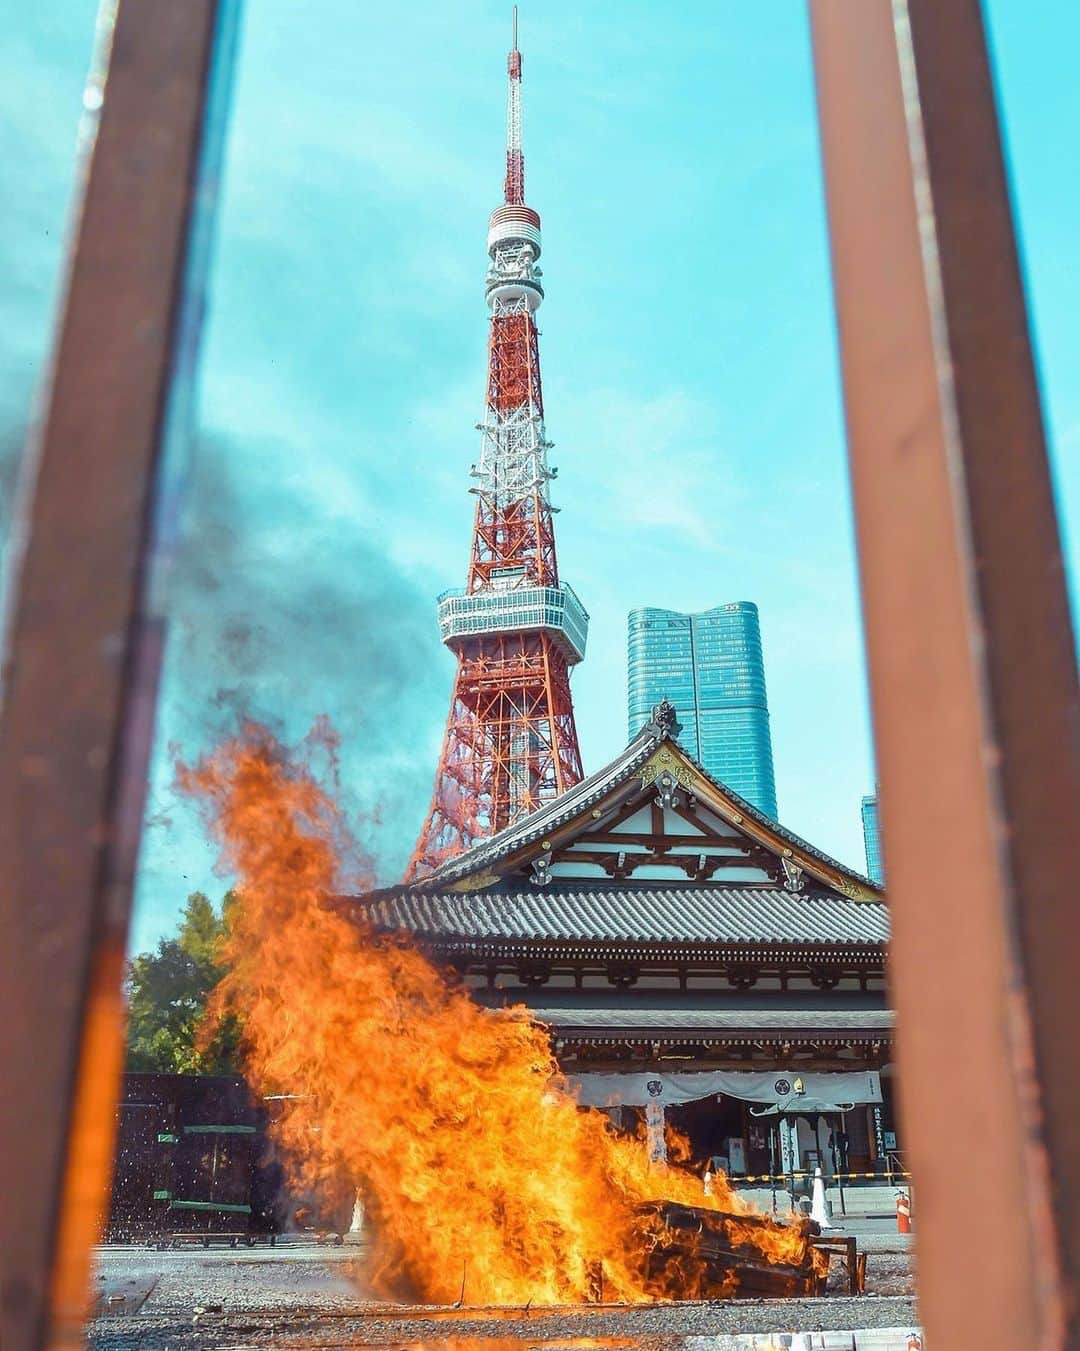 Promoting Tokyo Culture都庁文化振興部のインスタグラム：「An "otakiage" ceremony at Zōjō-ji Temple near Tokyo Tower.  Otakiage is a ceremony in which old good luck charms, money, Buddhist altars, mementos of the deceased, and other important items are burned in a fire to make offerings to the deceased. It is a traditional custom that has been practised in Japan since ancient times.  -  東京タワーを間近に望む増上寺の境内で、炎が勢い良く燃え上がる1枚。 これは、「お焚き上げ」を行っている様子です。  お焚き上げは、古いお守りやお札、仏壇、故人との思い出の品など、 粗末に扱うことのできない大切な品物を火で焚いて供養する儀式。 日本で古くから行われている伝統的な風習です。  #tokyoartsandculture 📸: @you.itabashi  #zojoji #tokyotower #増上寺 #東京タワー #japantraditional #japanculture #伝統芸能 #日本文化 #artandculture #artculture #culturalexperience #artexperience #culturetrip #theculturetrip #japantrip #tokyotrip #tokyophotography #tokyojapan  #tokyotokyo #explorejpn #unknownjapan #discoverjapan #japan_of_insta  #nipponpic  #japanfocus #japanesestyle #artphoto #artstagram」